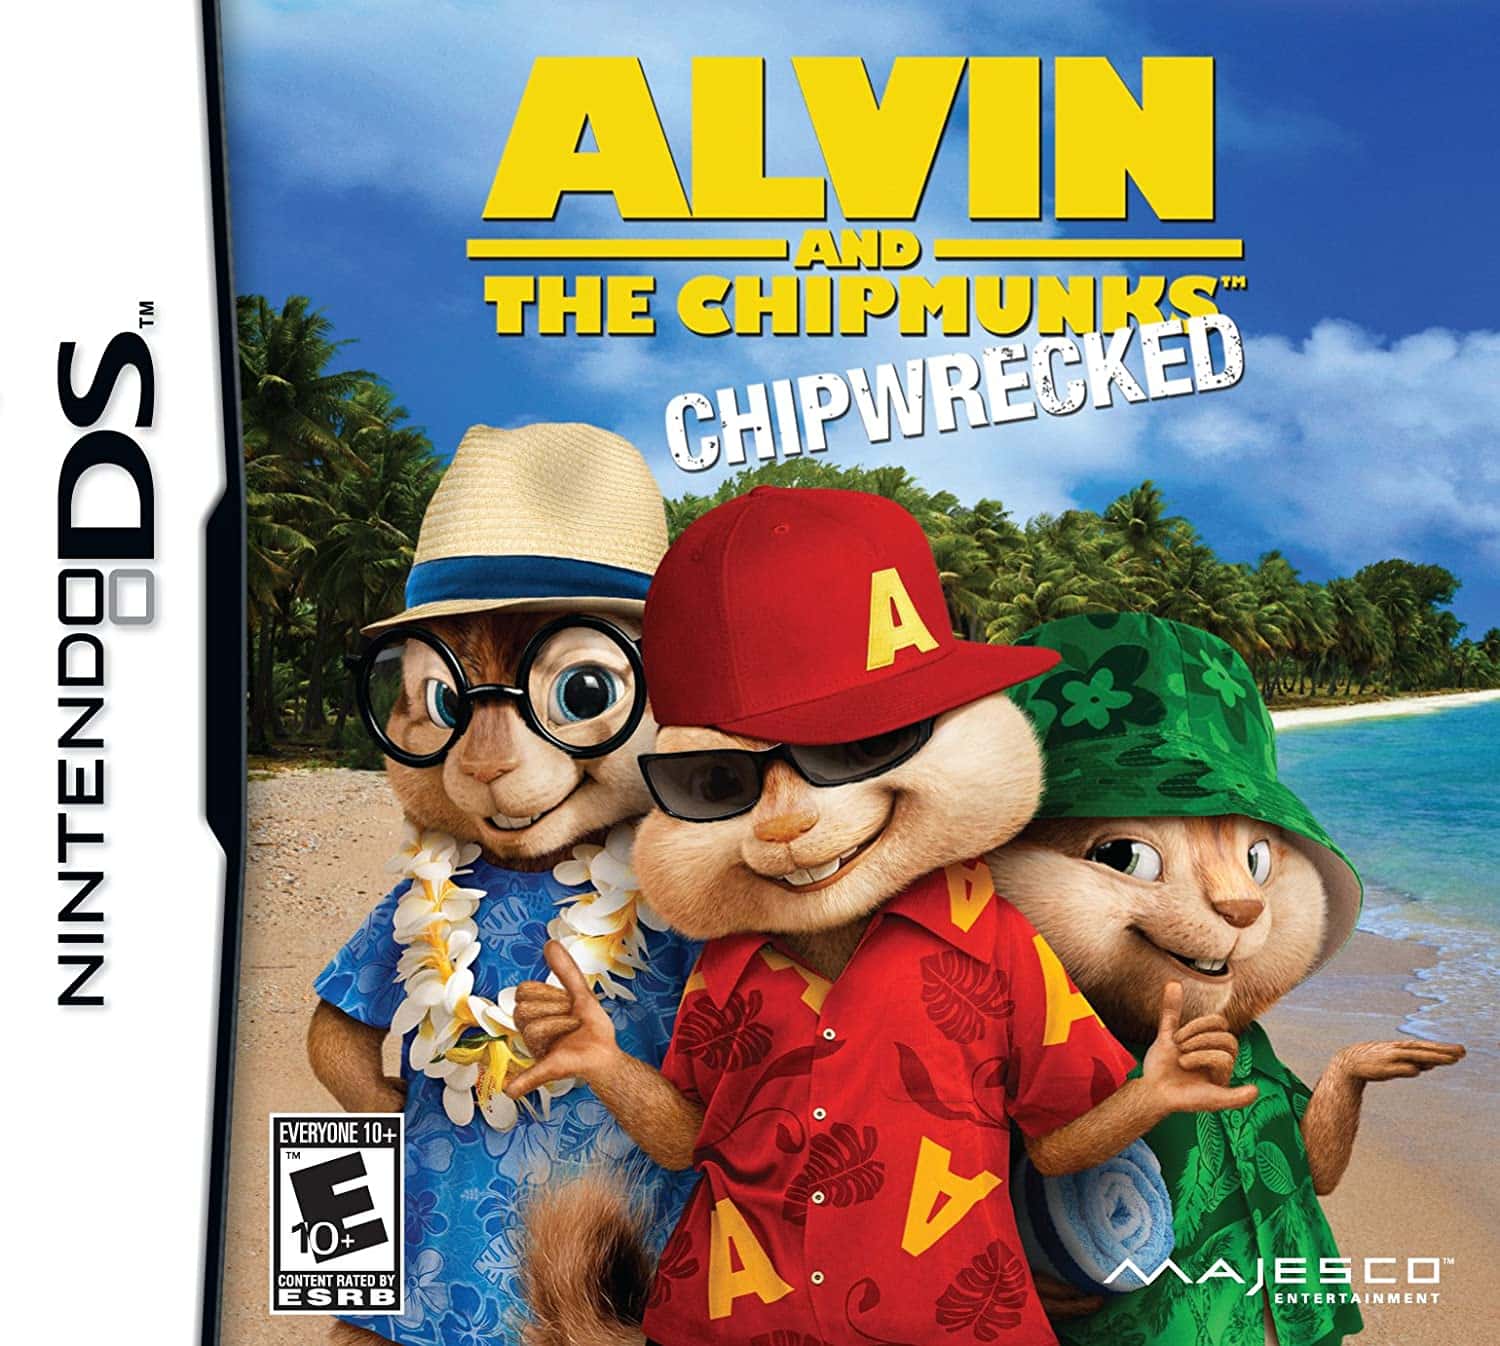 Alvin and the Chipmunks Chipwrecked facts statistics